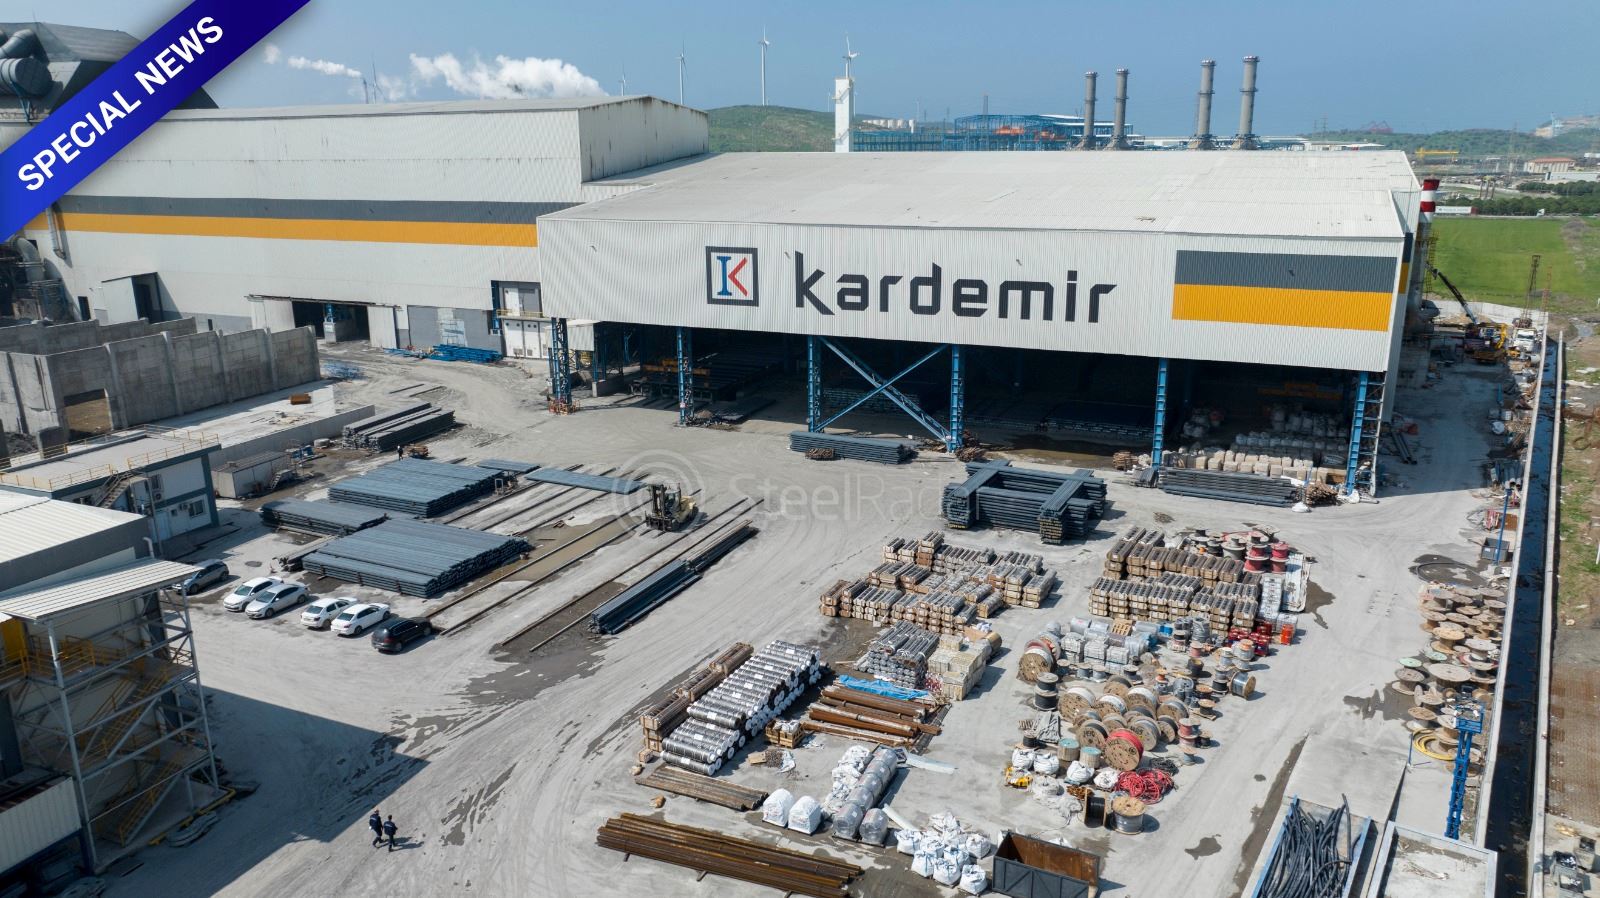 Leading profile producer Kar-demir has increased its production of rebar and wire rod